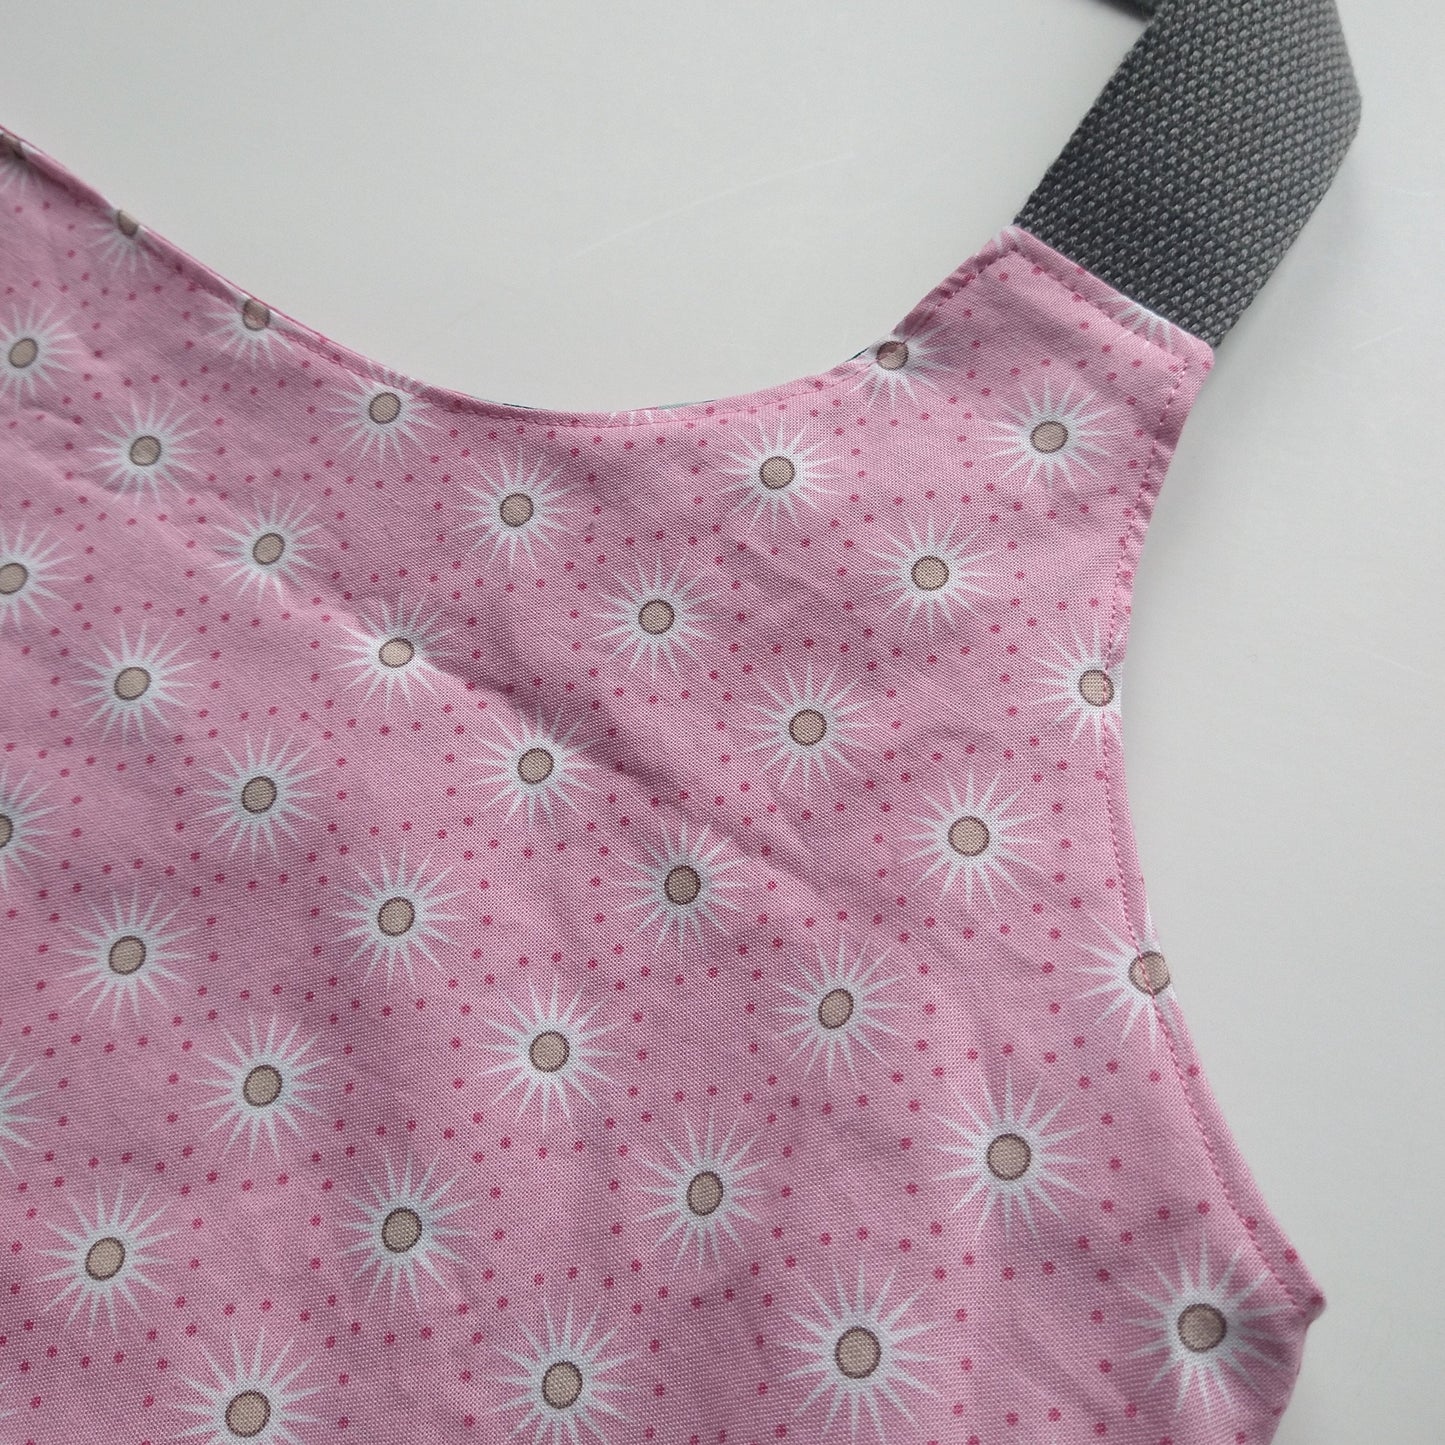 Shopping/Beach bag, reversible, size large, baby pink flowers (Handmade in Canada)